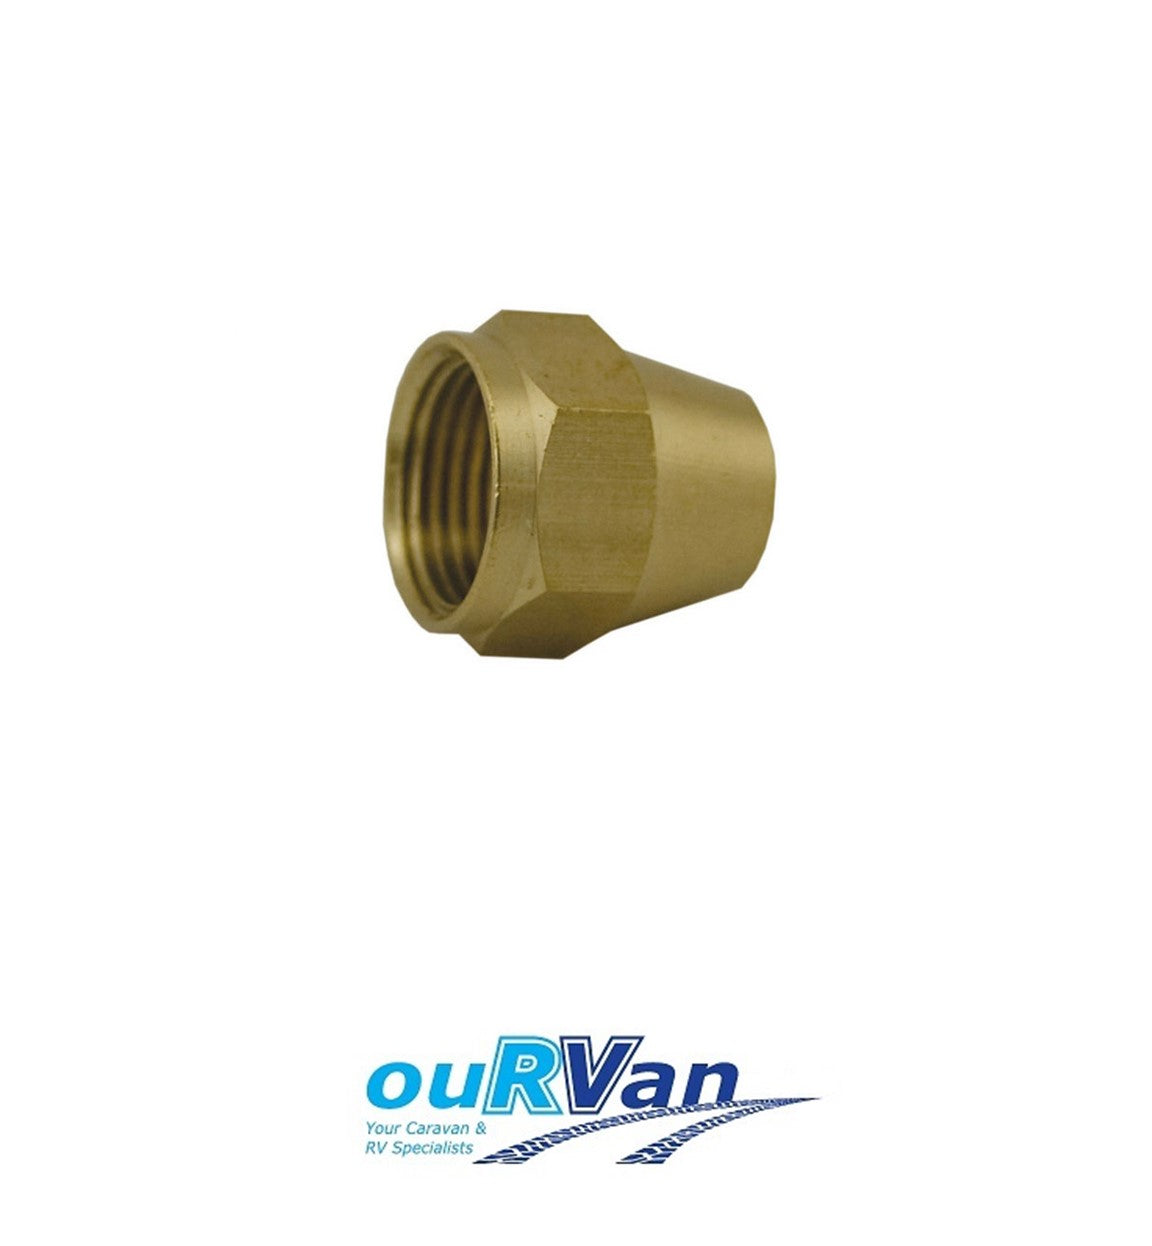 No 6r 3/8 X 5/16 Reducing Flare Nut - 01-620